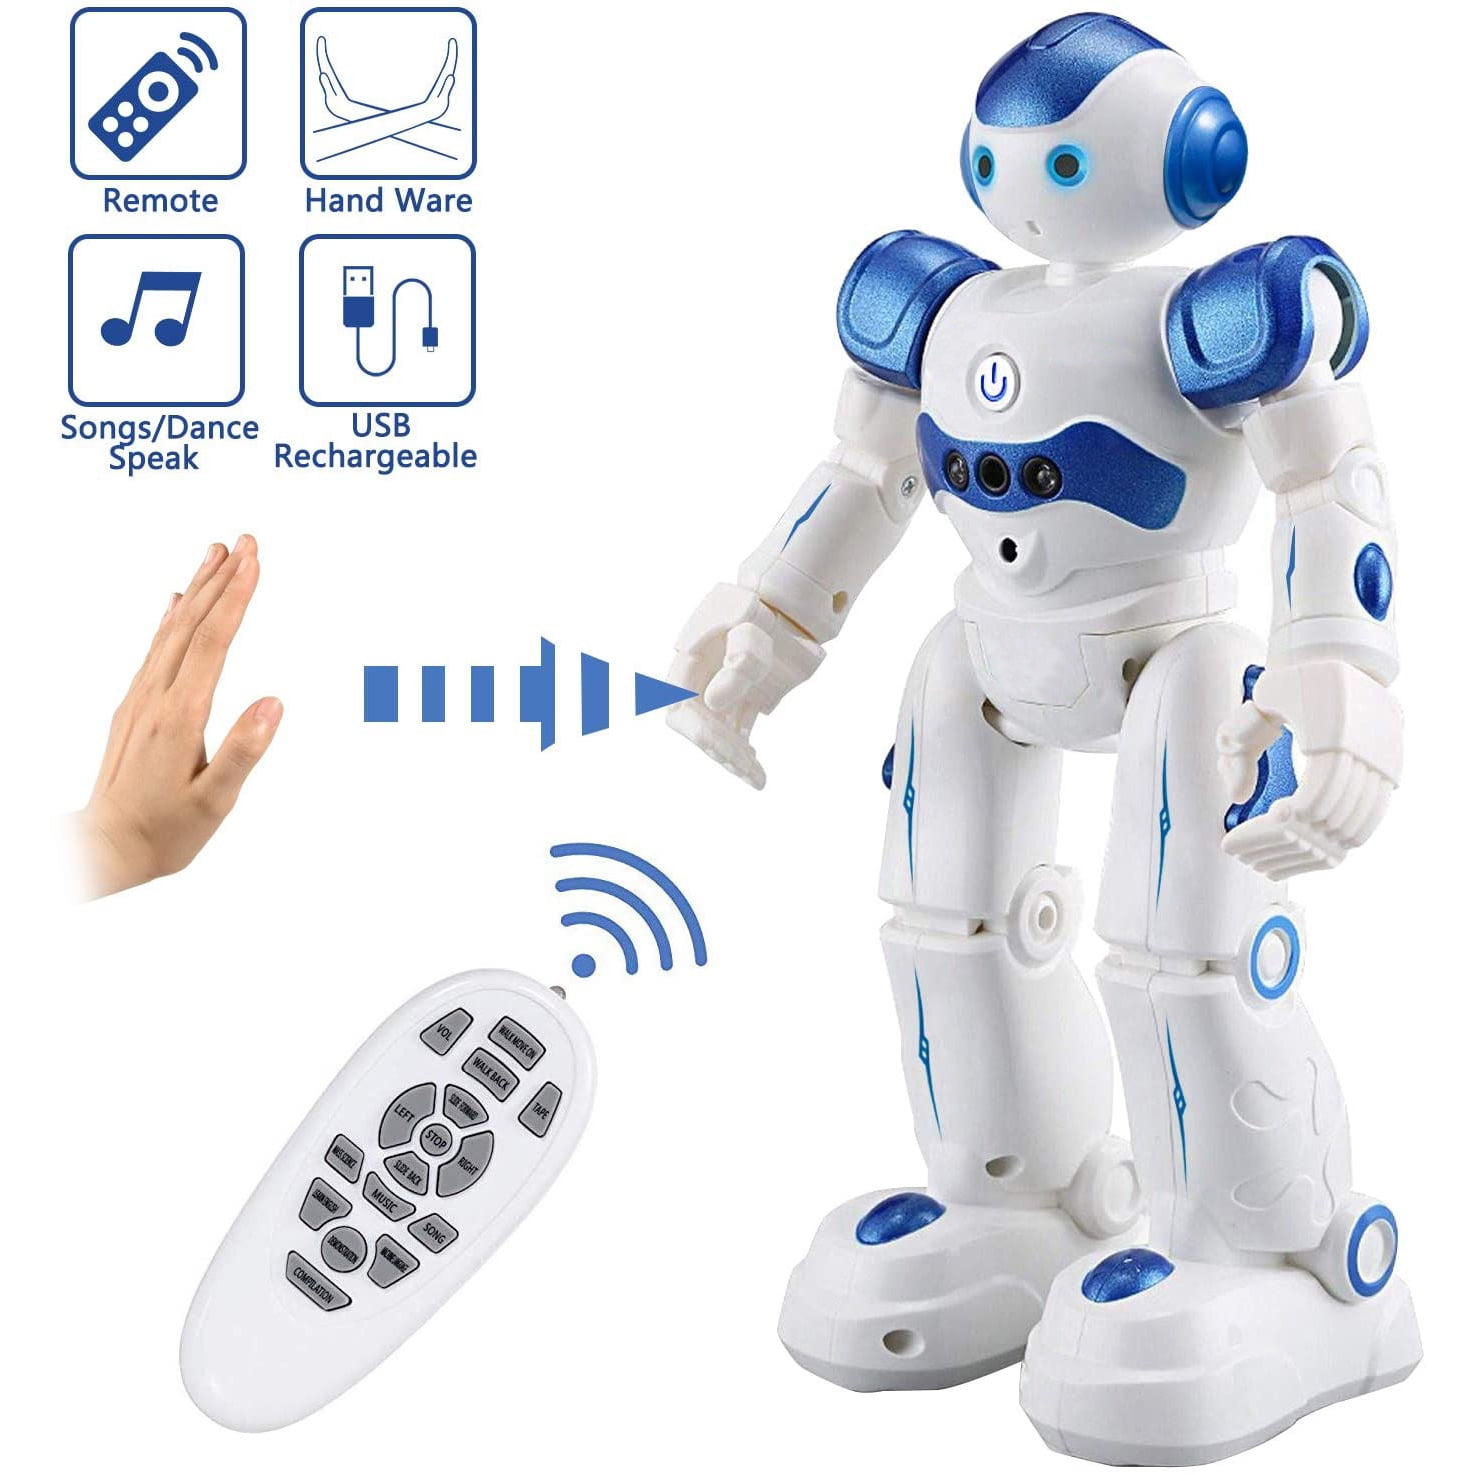 Intelligent Robot RC Remote Control Smart Action Music Smart-Robot Kids Toy Gift 